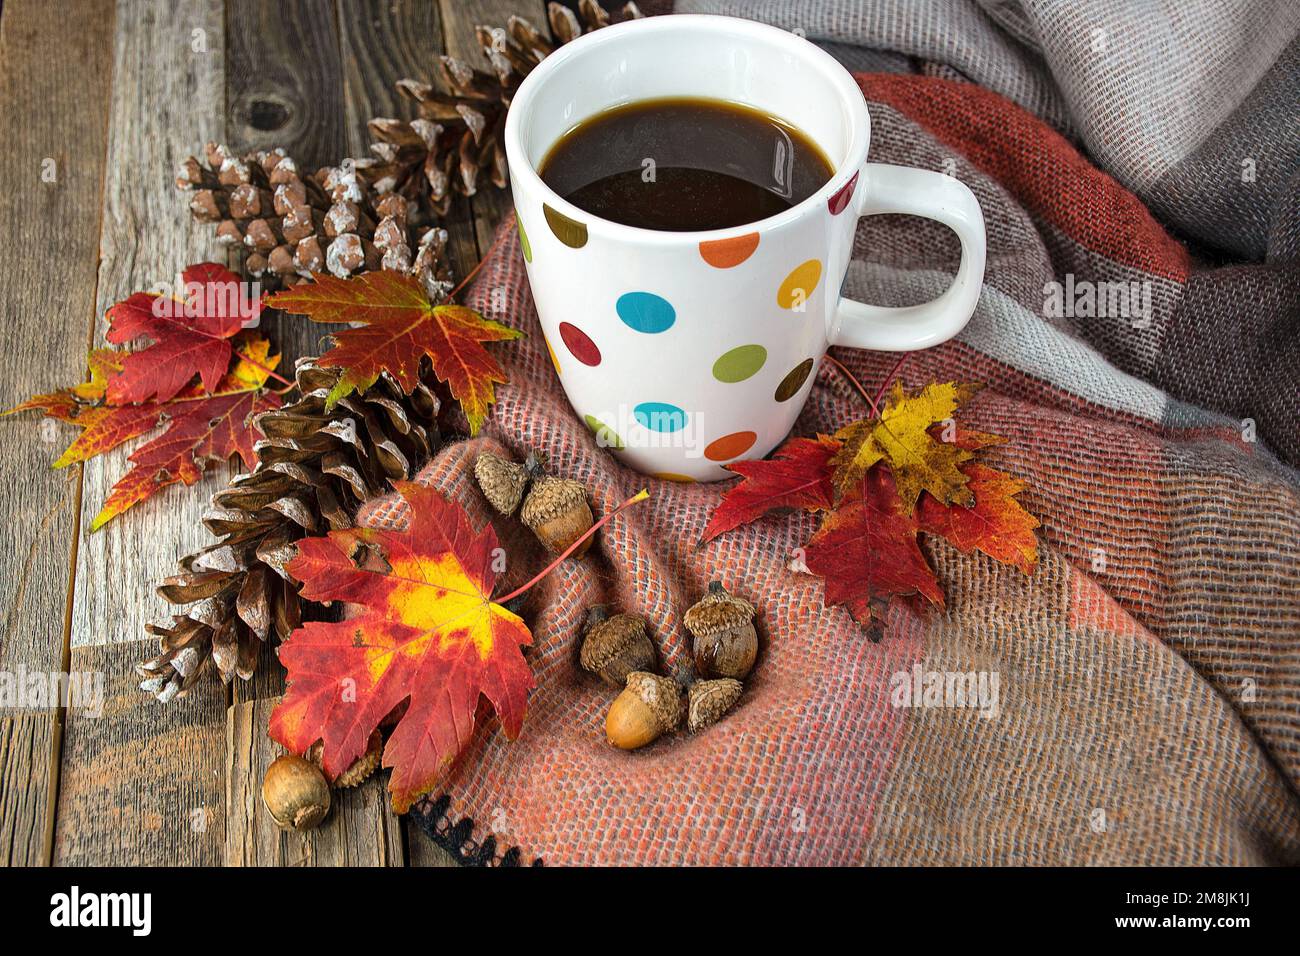 Polka dot coffee mug on a soft blanket with autumn leaves, acorns, and pine cones Stock Photo